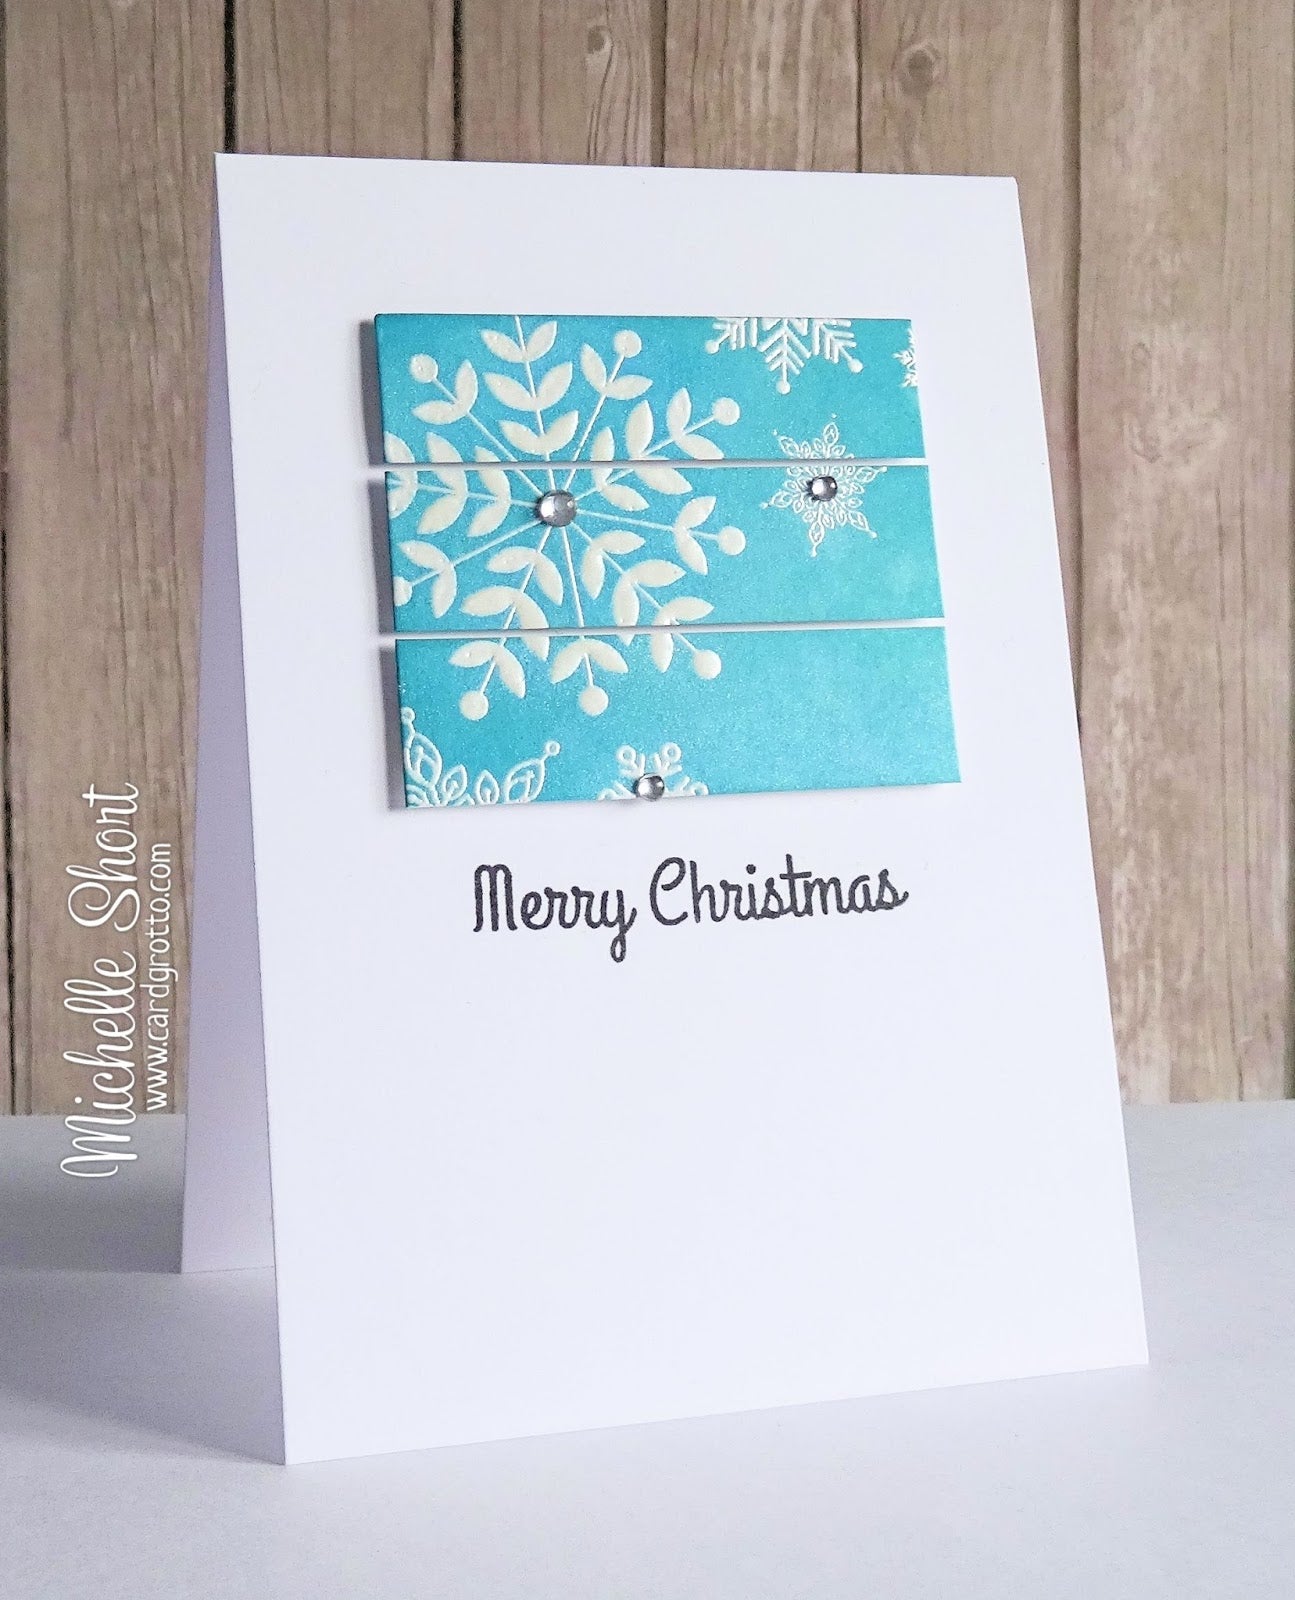 Nellie's Choice - Clear Stamp Snowflakes